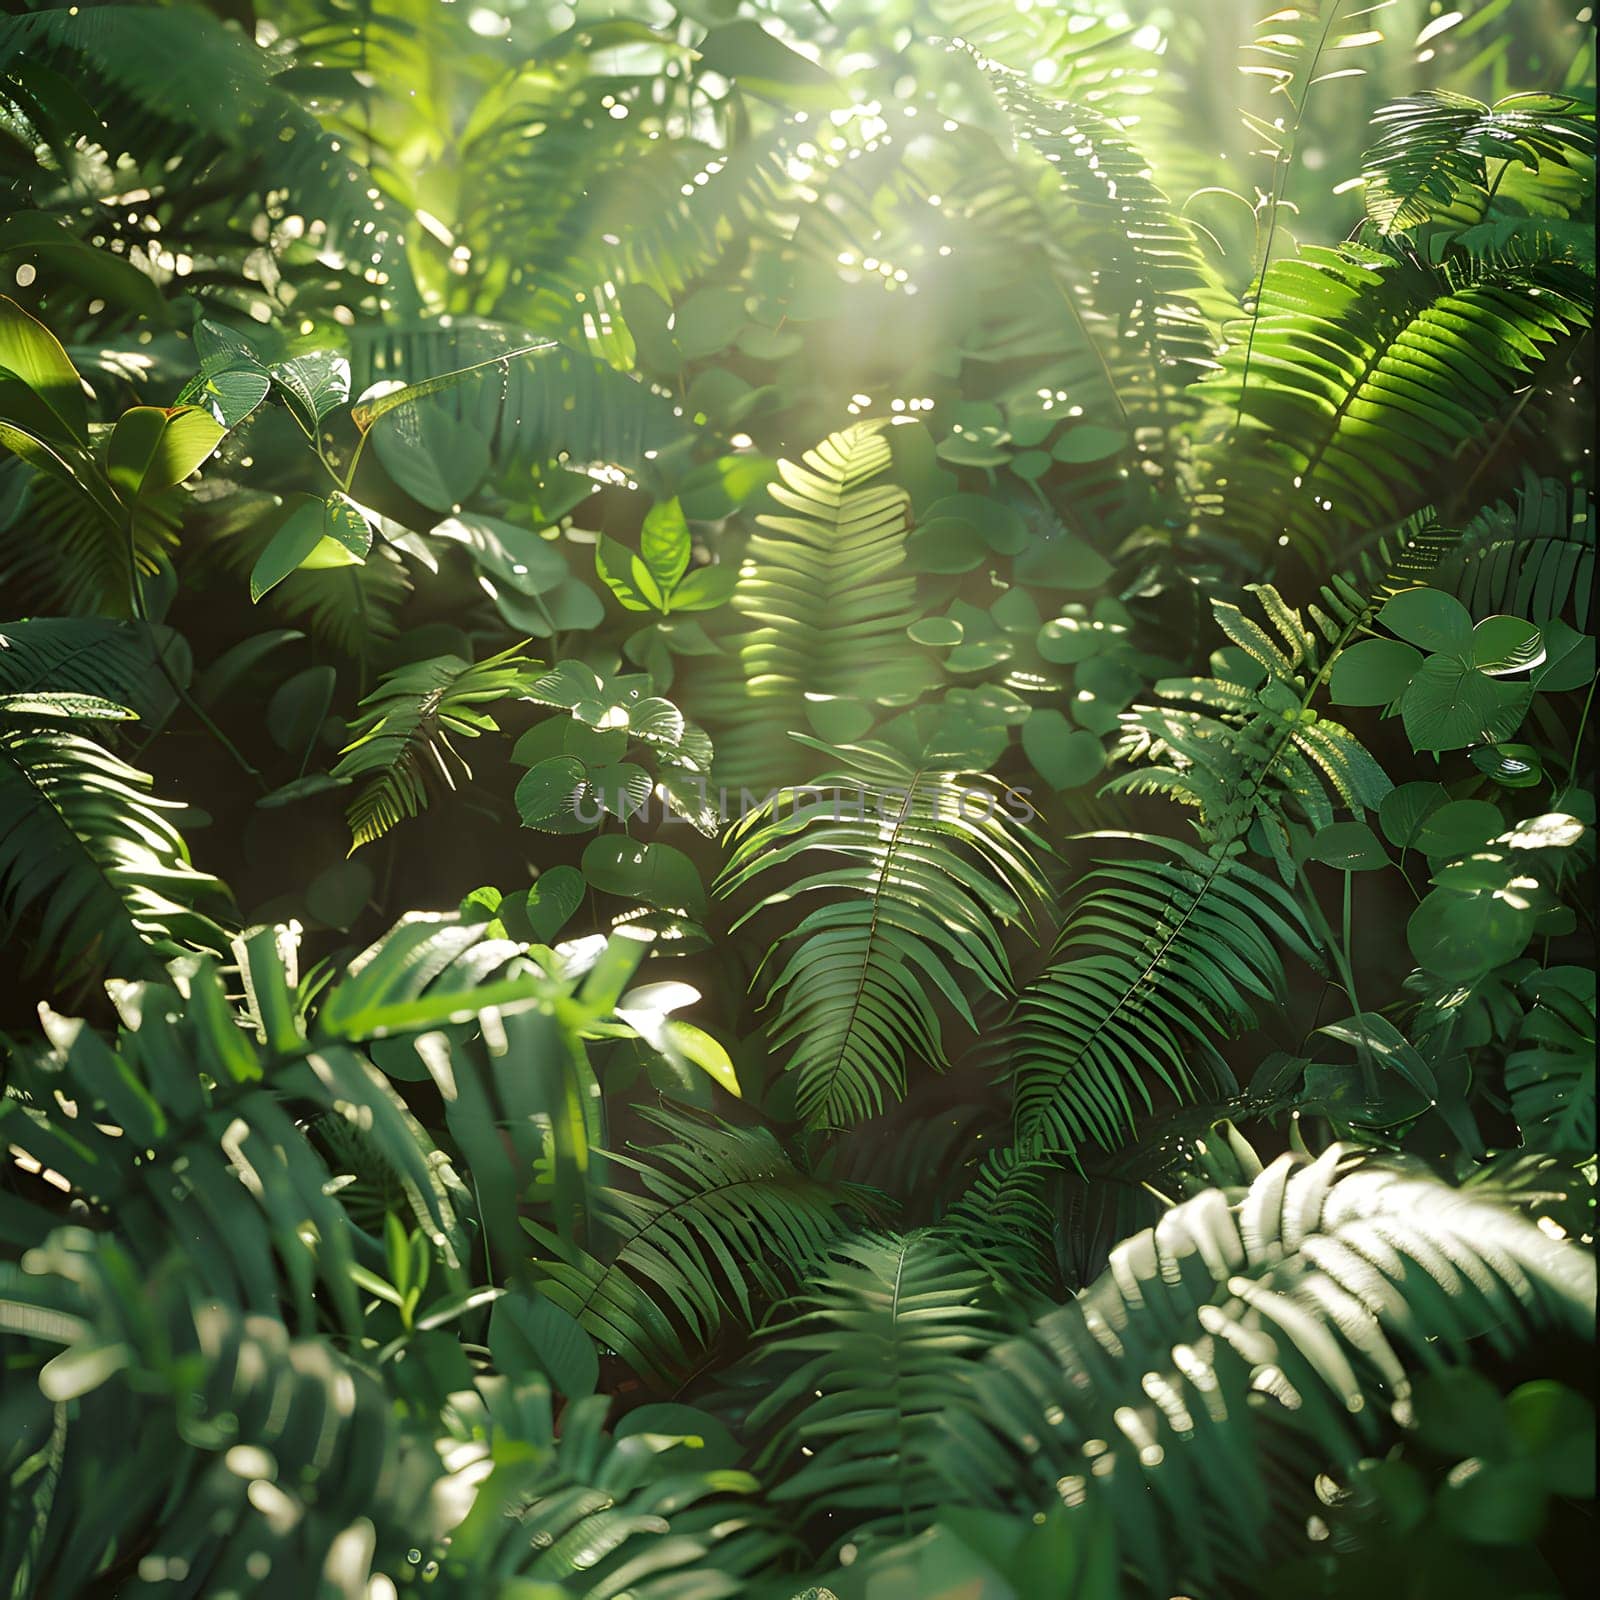 The sun filters through the lush foliage of terrestrial plants like ferns and shrubs in the jungle, creating a mesmerizing natural landscape